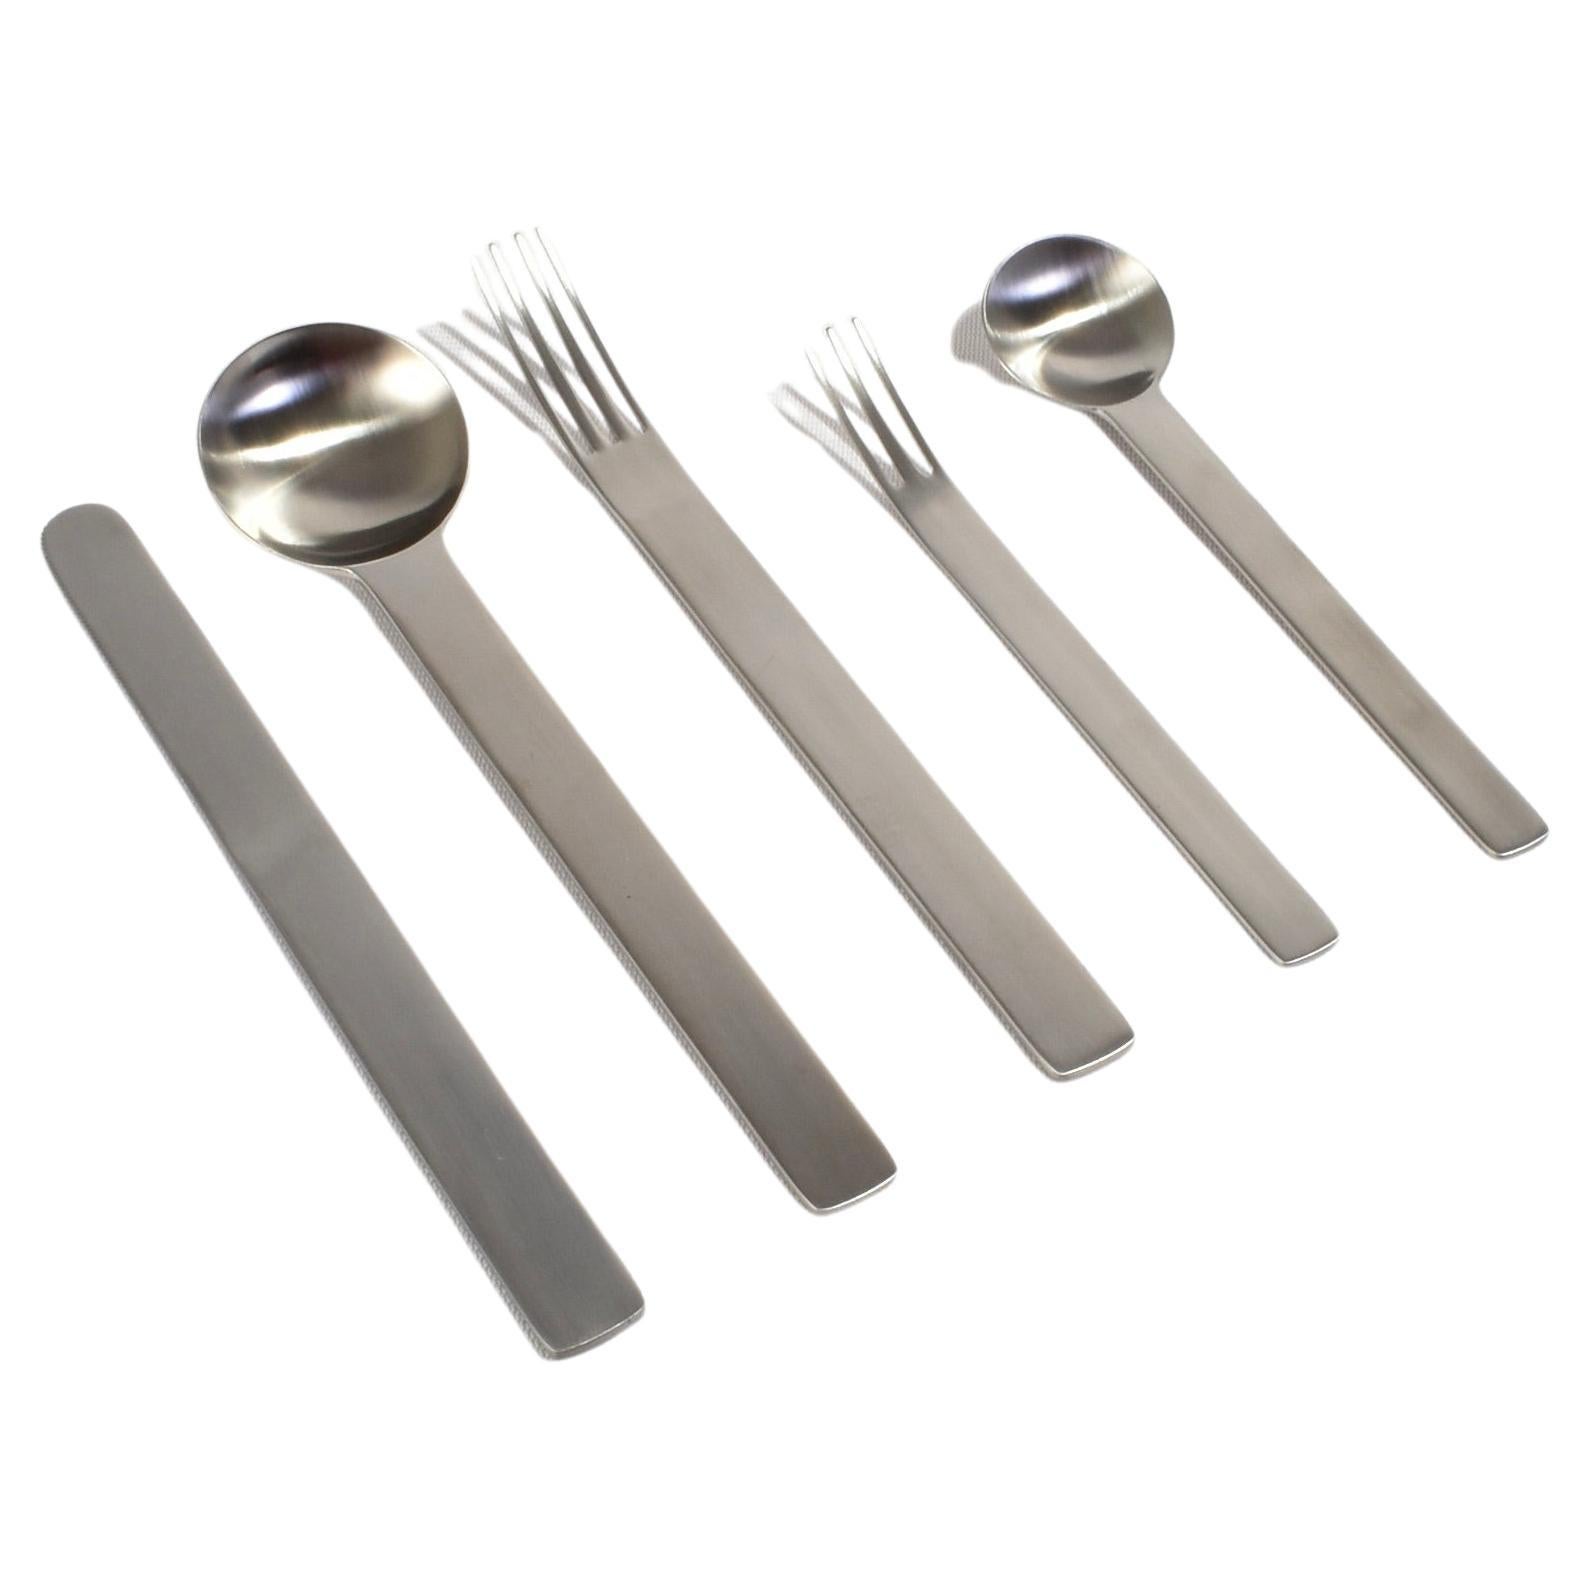 TI-1 Boxed Cutlery Set, Matte For Sale